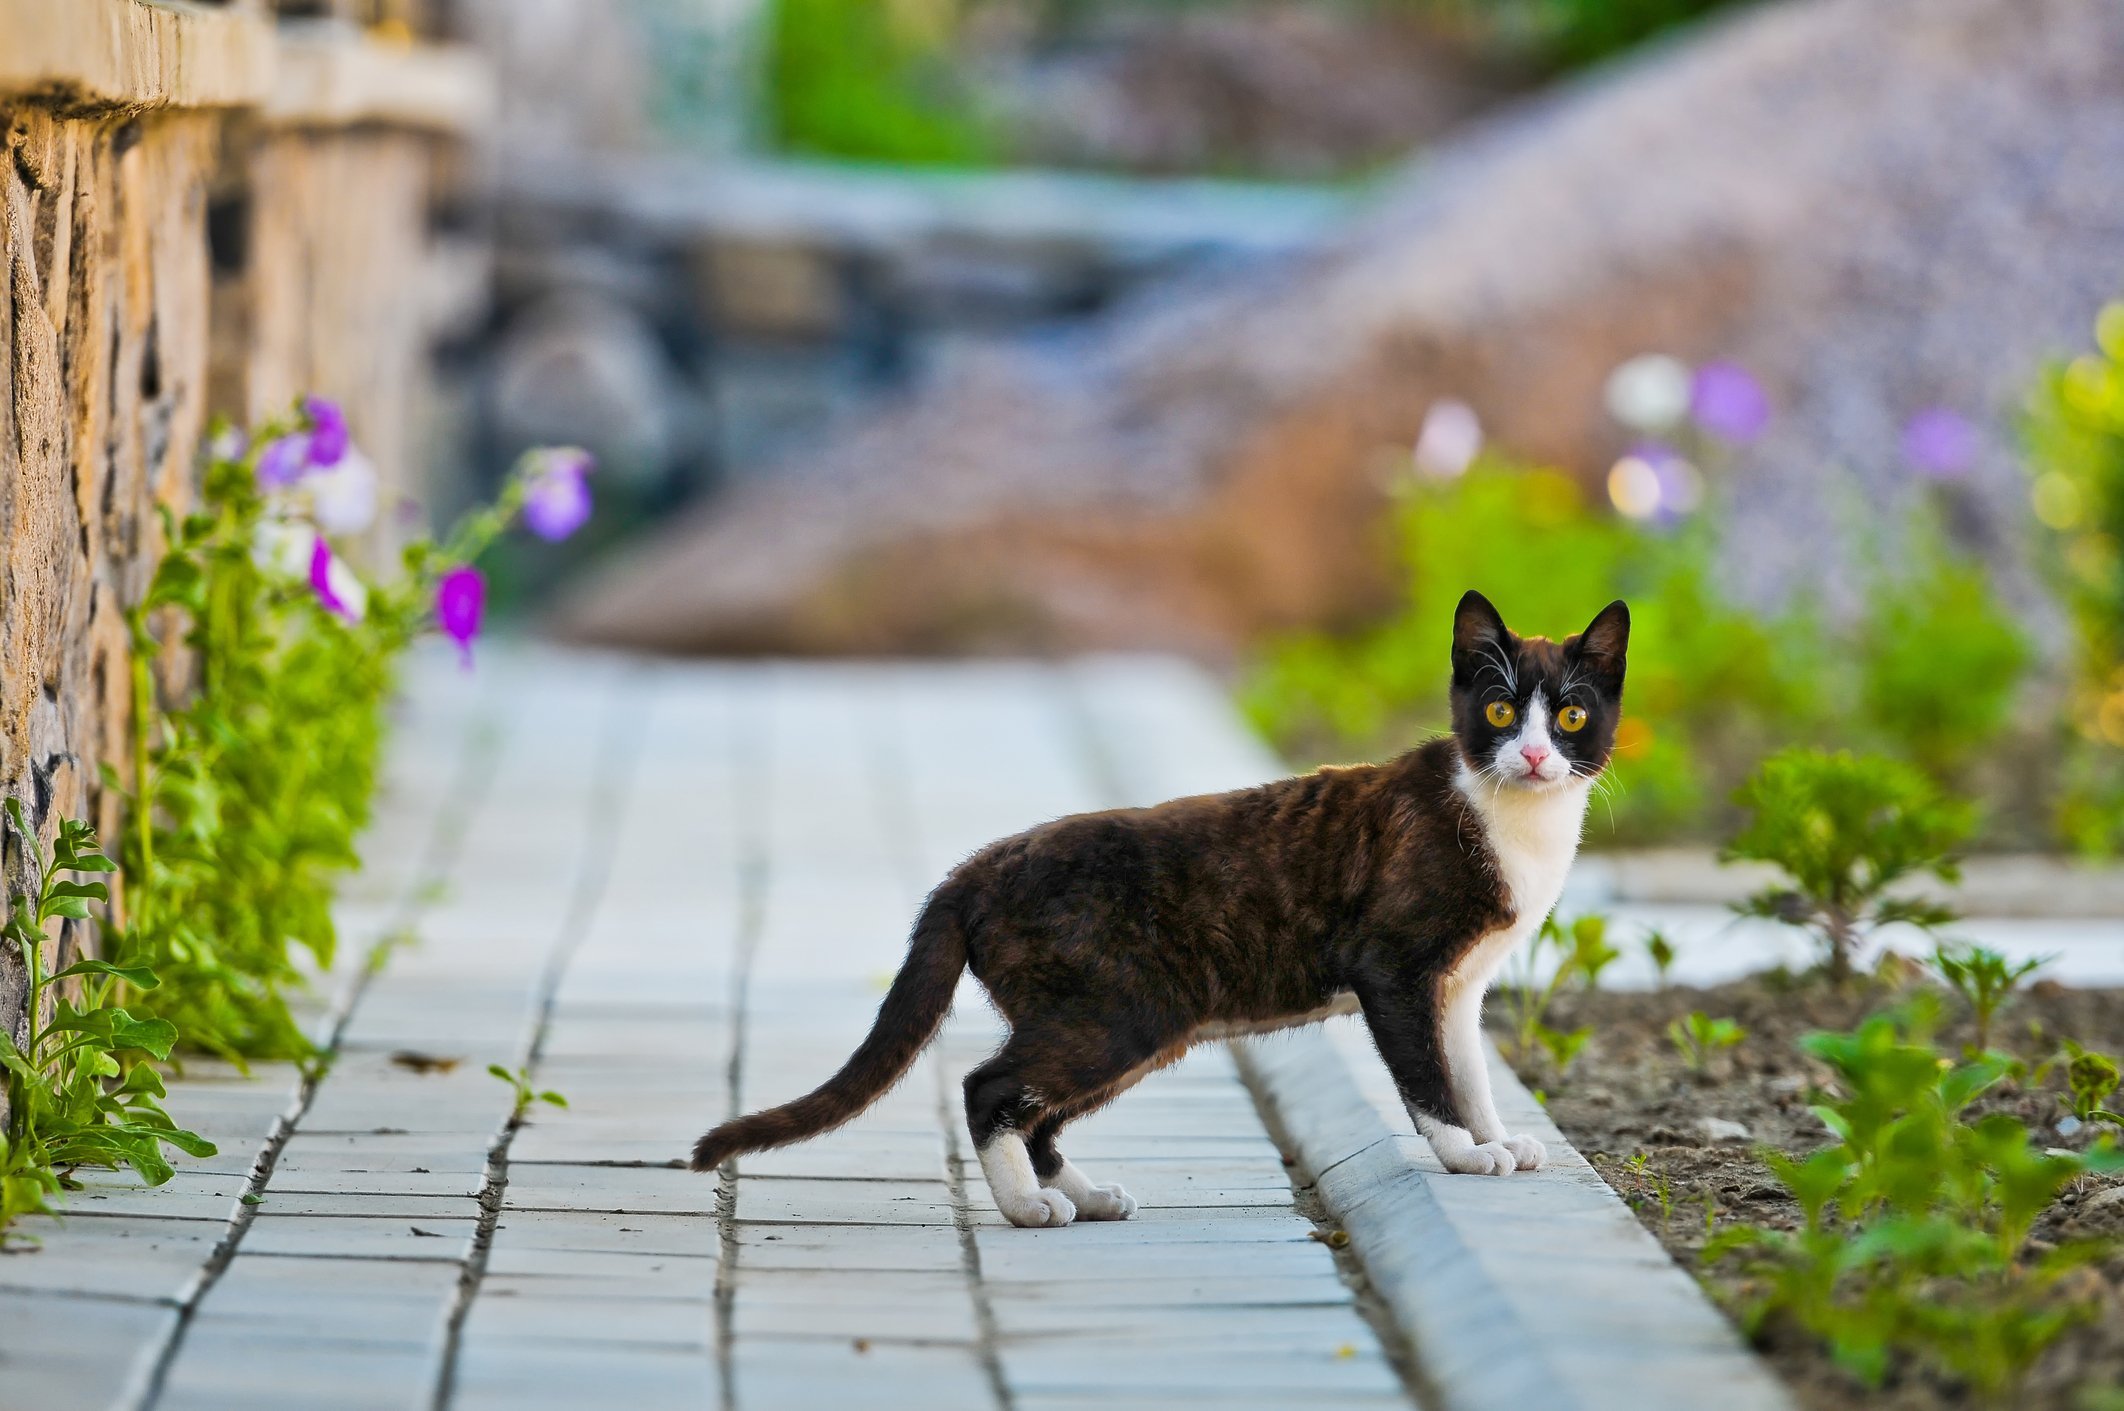 Dear Doctor: Toxic Plants and Outdoor Cats